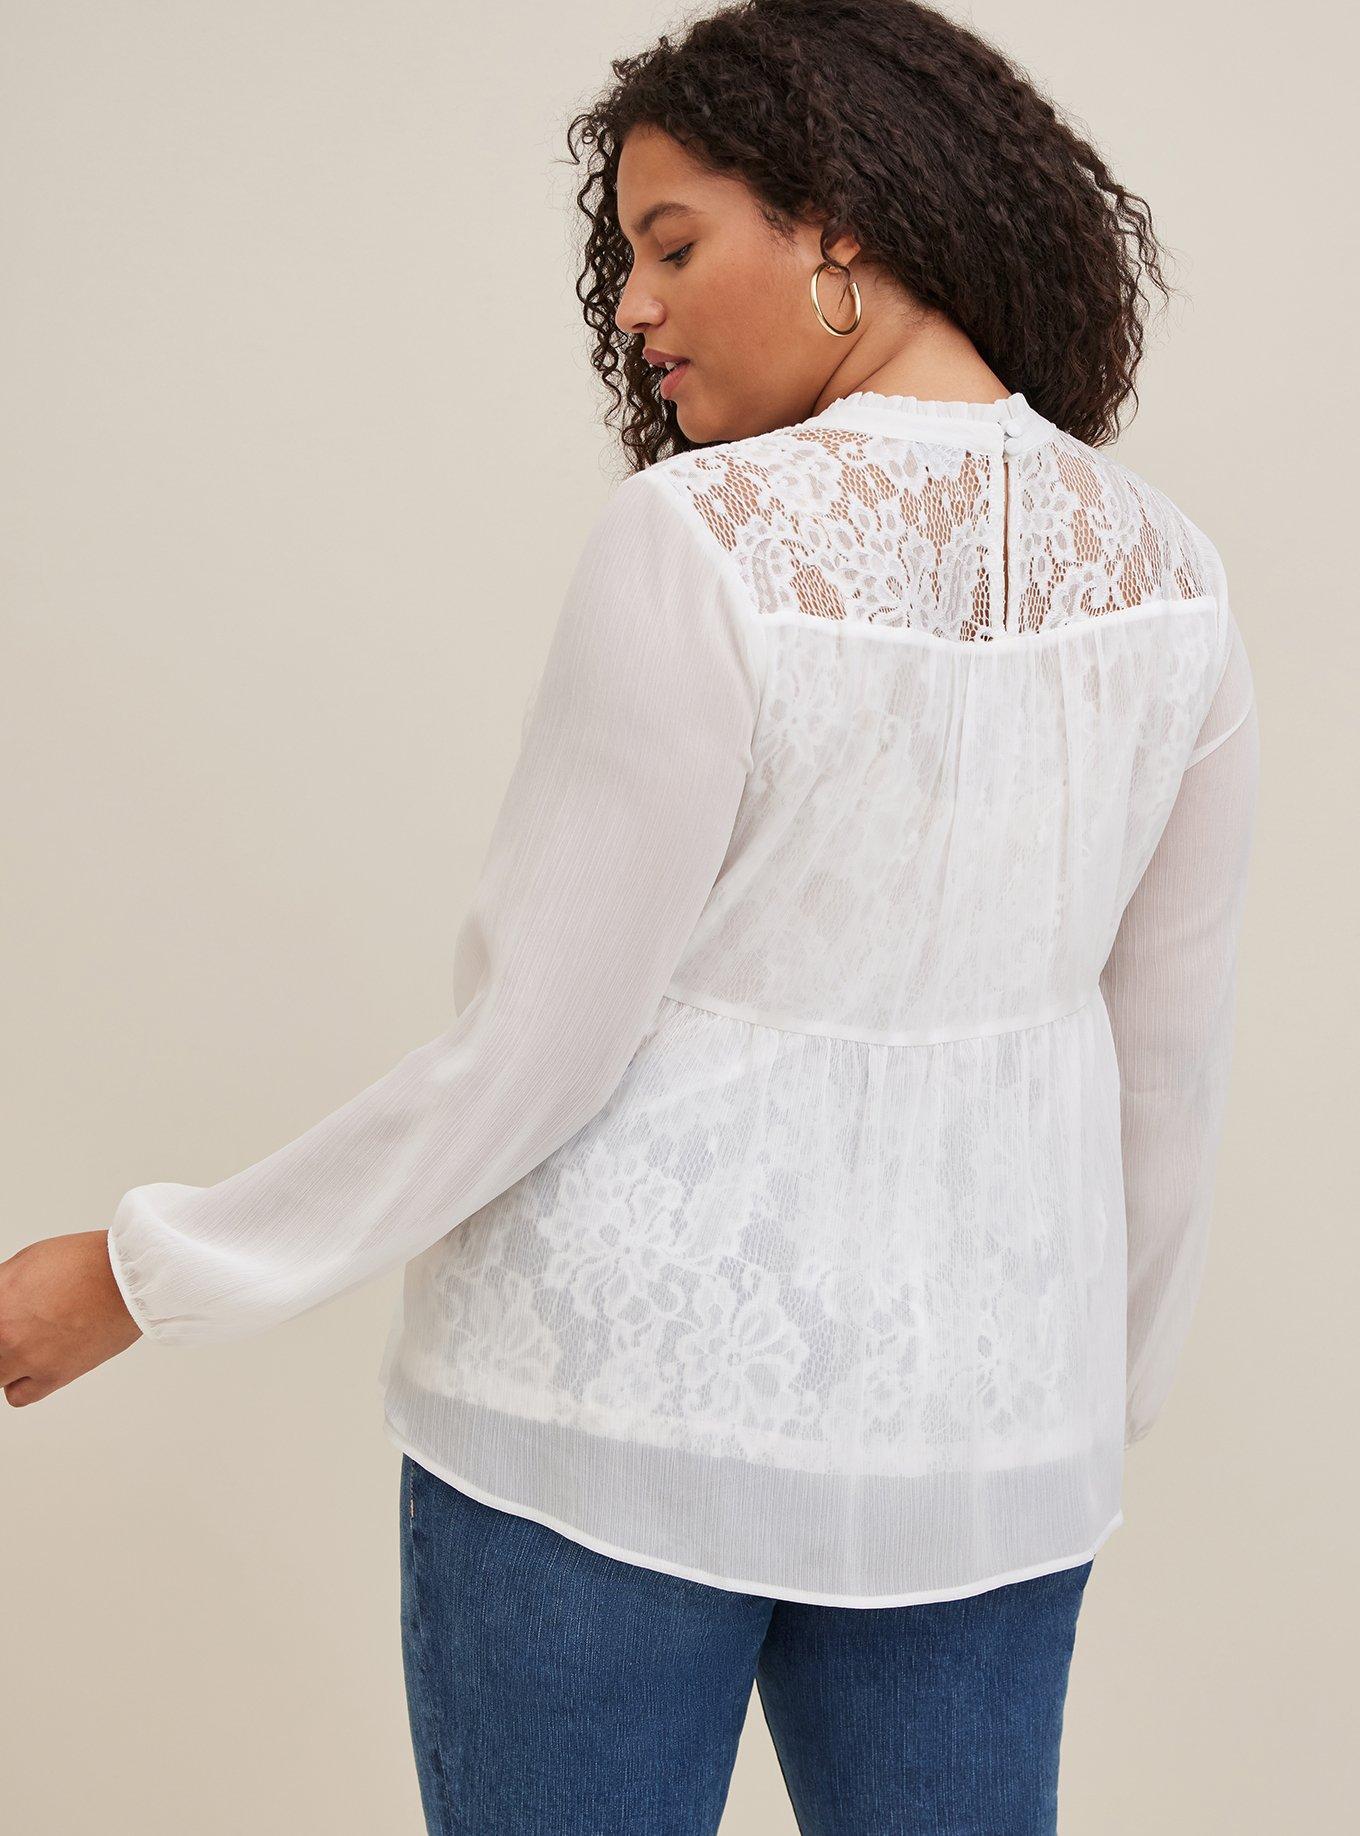 Plus Size - Lace With Chiffon Overlay Blouse - Torrid